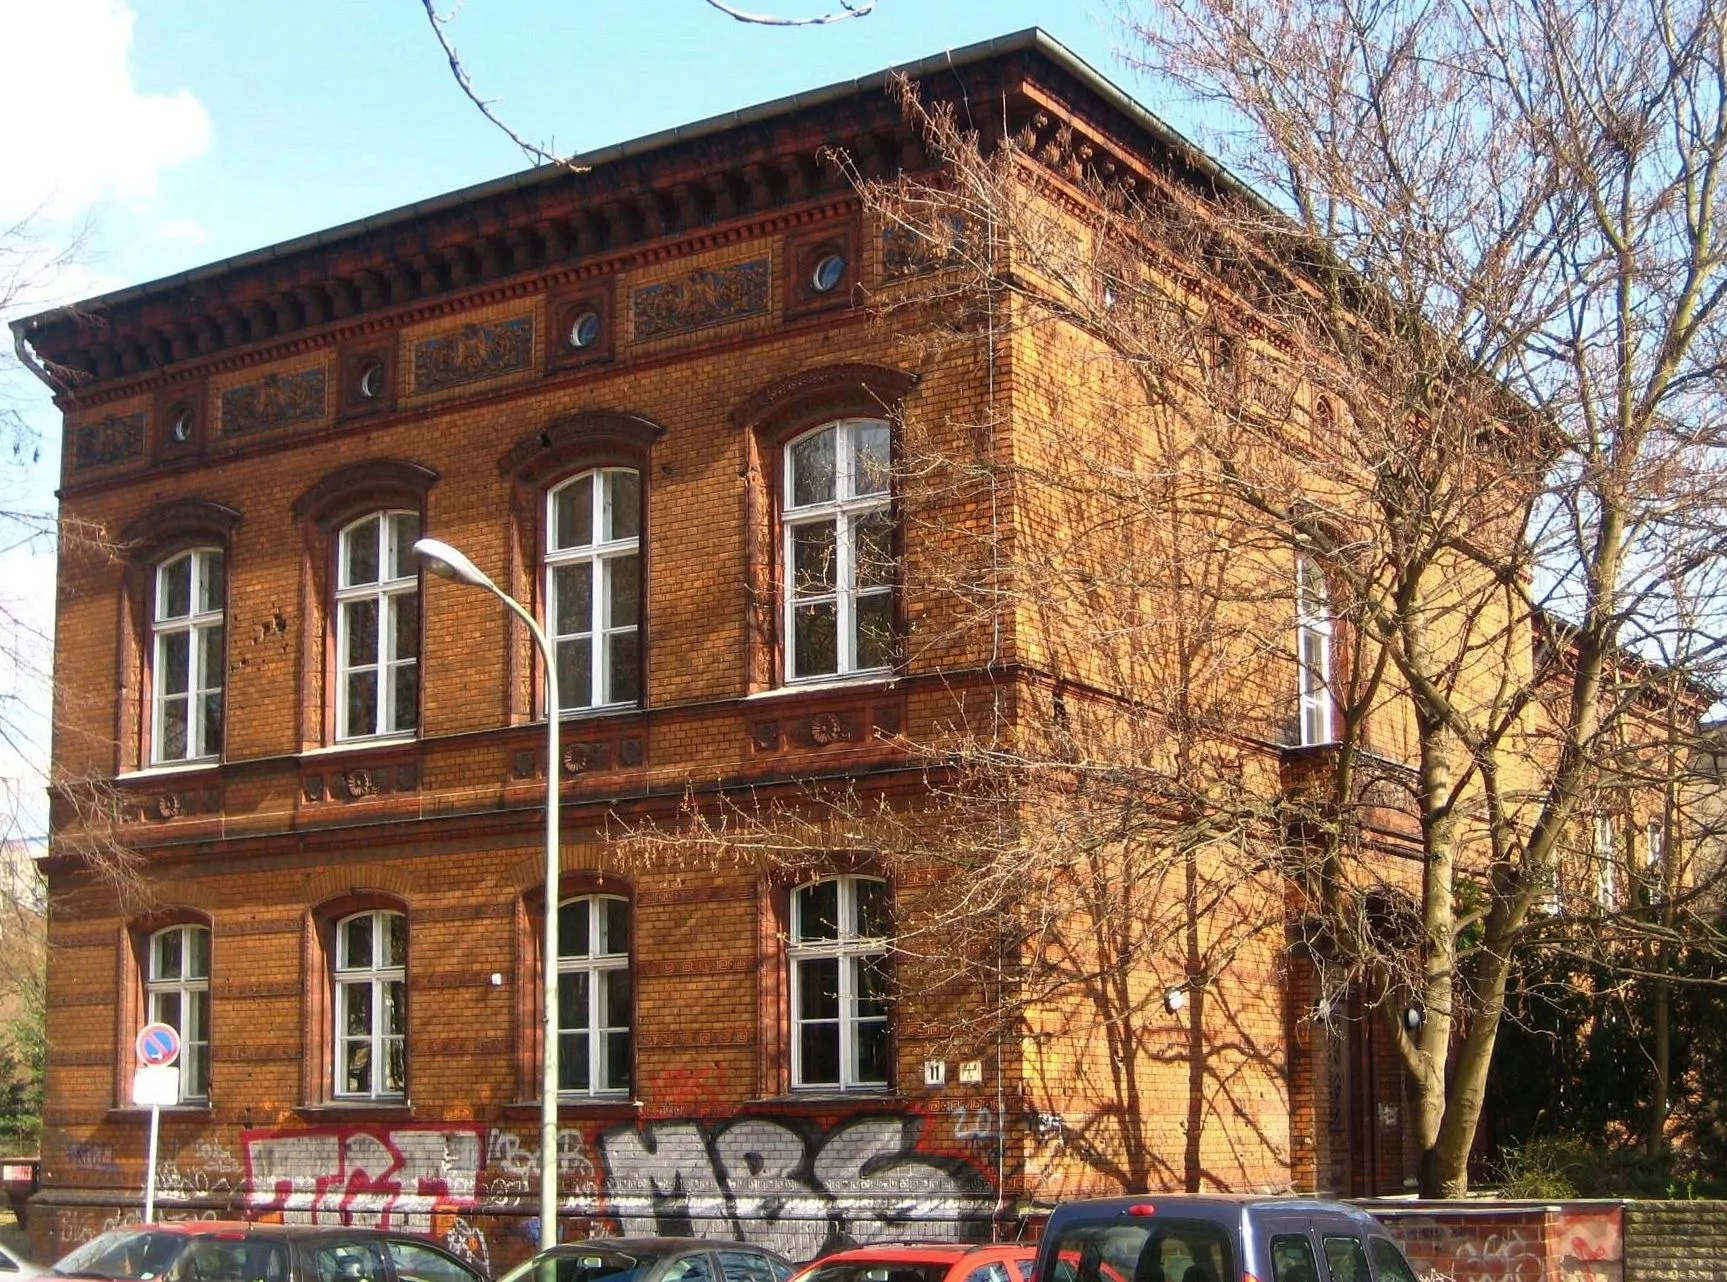 Photo showing: Former principal residence of the Margareten Lyceum (school for girls) at Ifflandstraße 11 in Berlin-Mitte. The school complex was built from 1884 to 1885 to a design by Hermann Blankenstein, but this is the only part preserved in its original form. It is now used by Max-Planck-Schule. The building has been designated as a historic landmark.